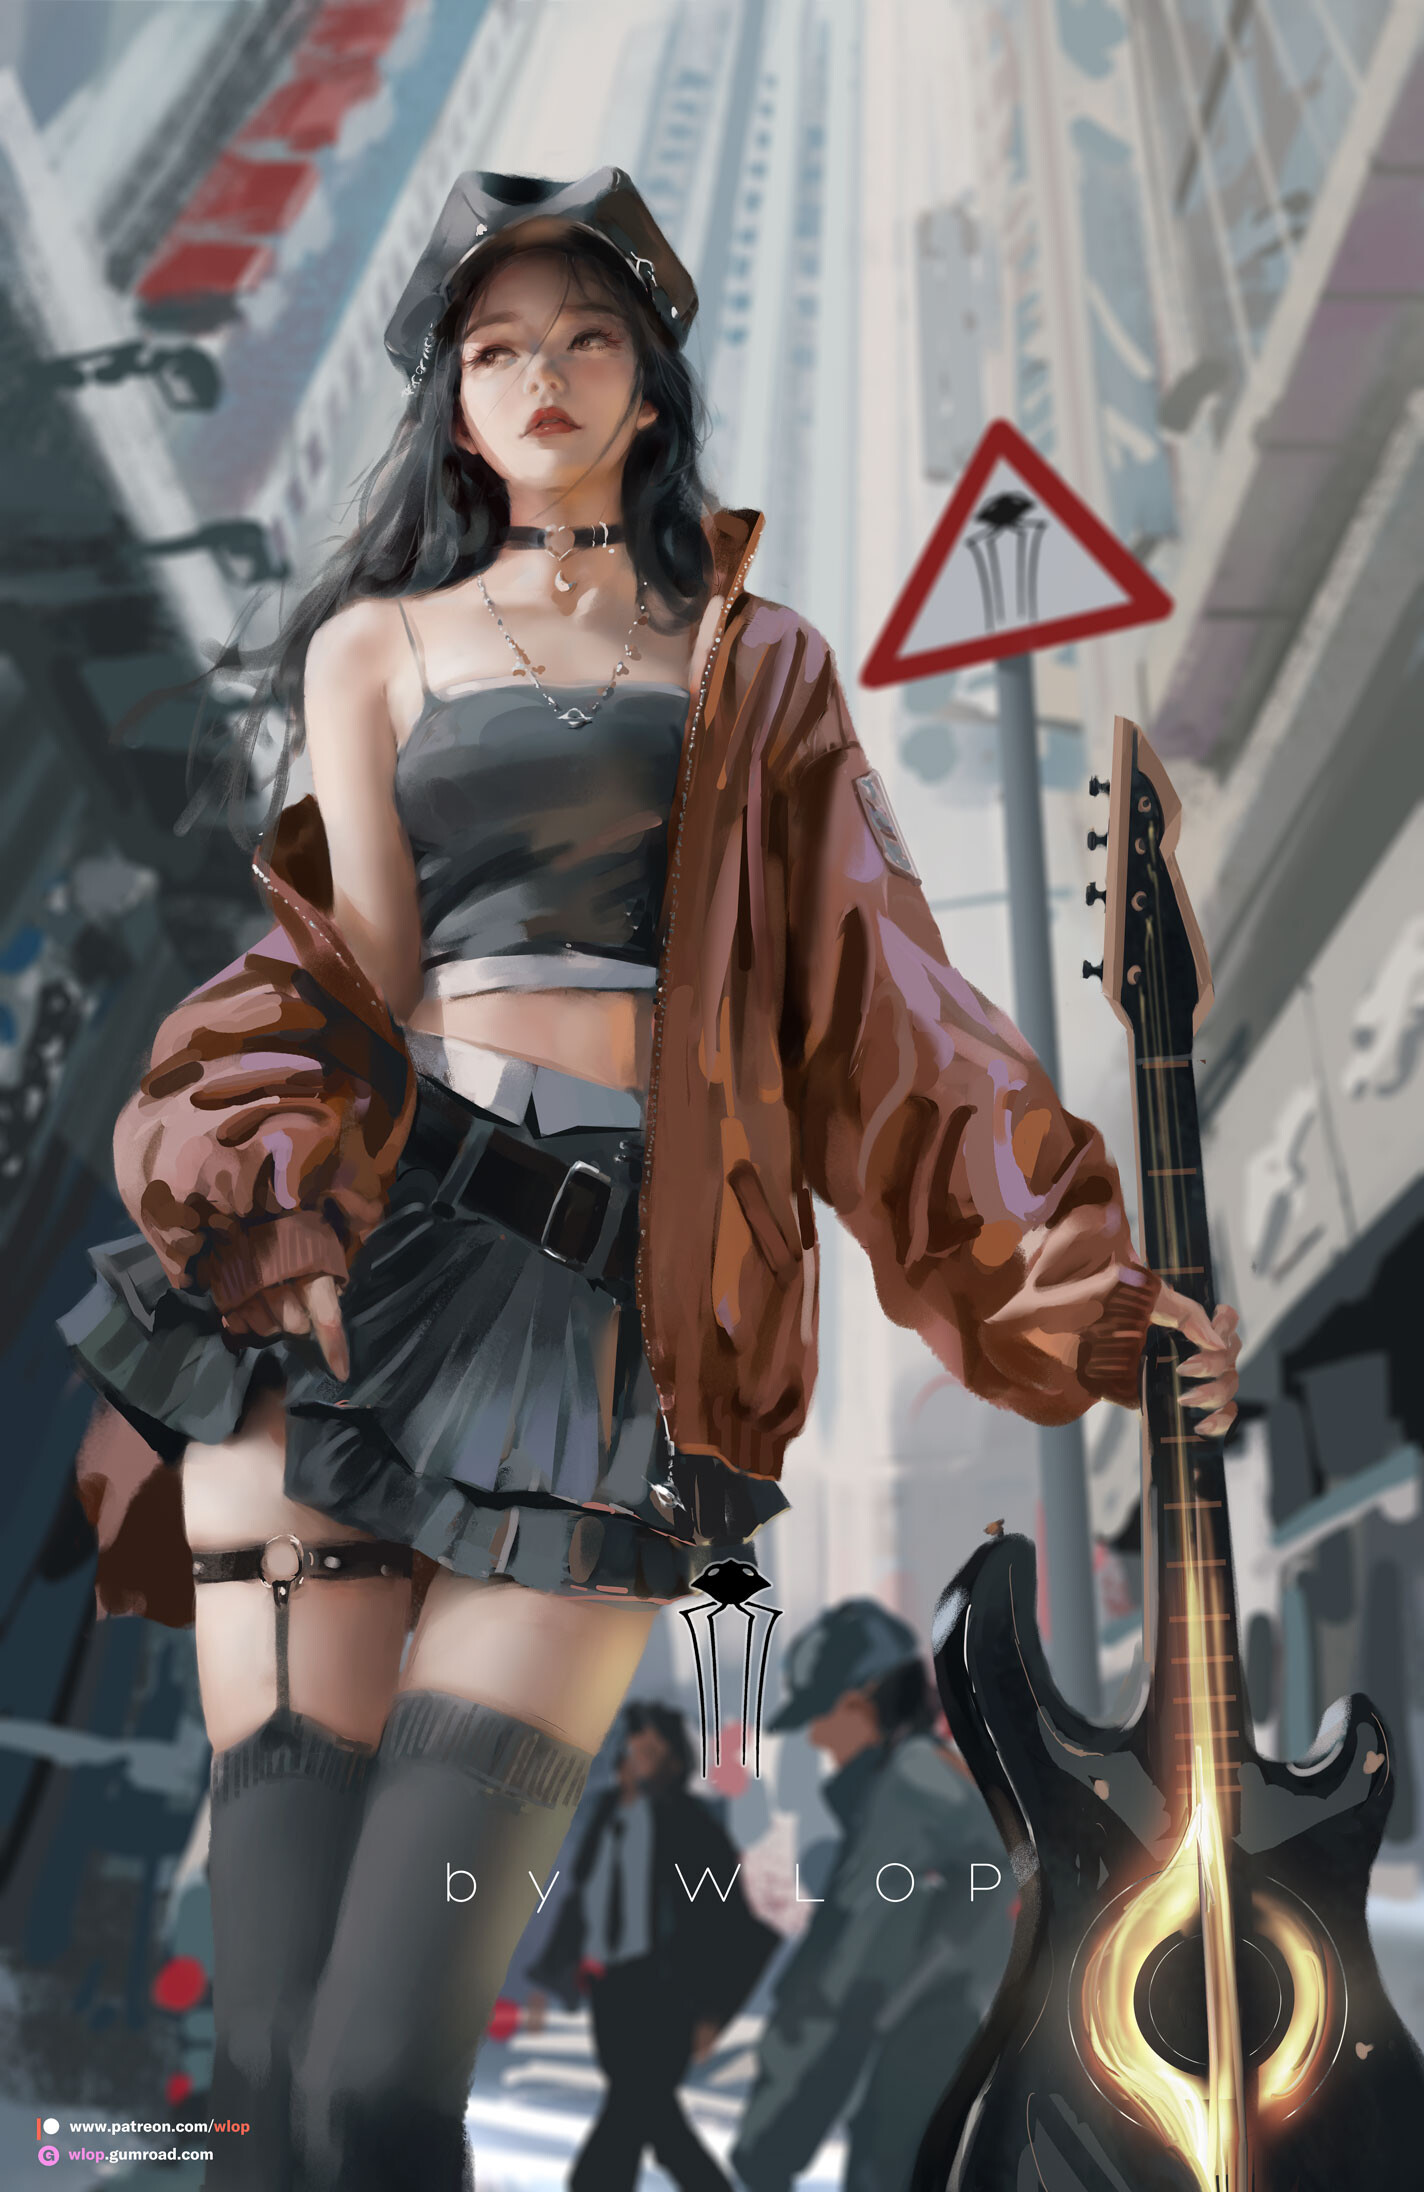 General 1424x2192 drawing hat open jacket guitar city skirt model portrait display women looking away long hair choker necklace musical instrument stockings standing building WLOP watermarked